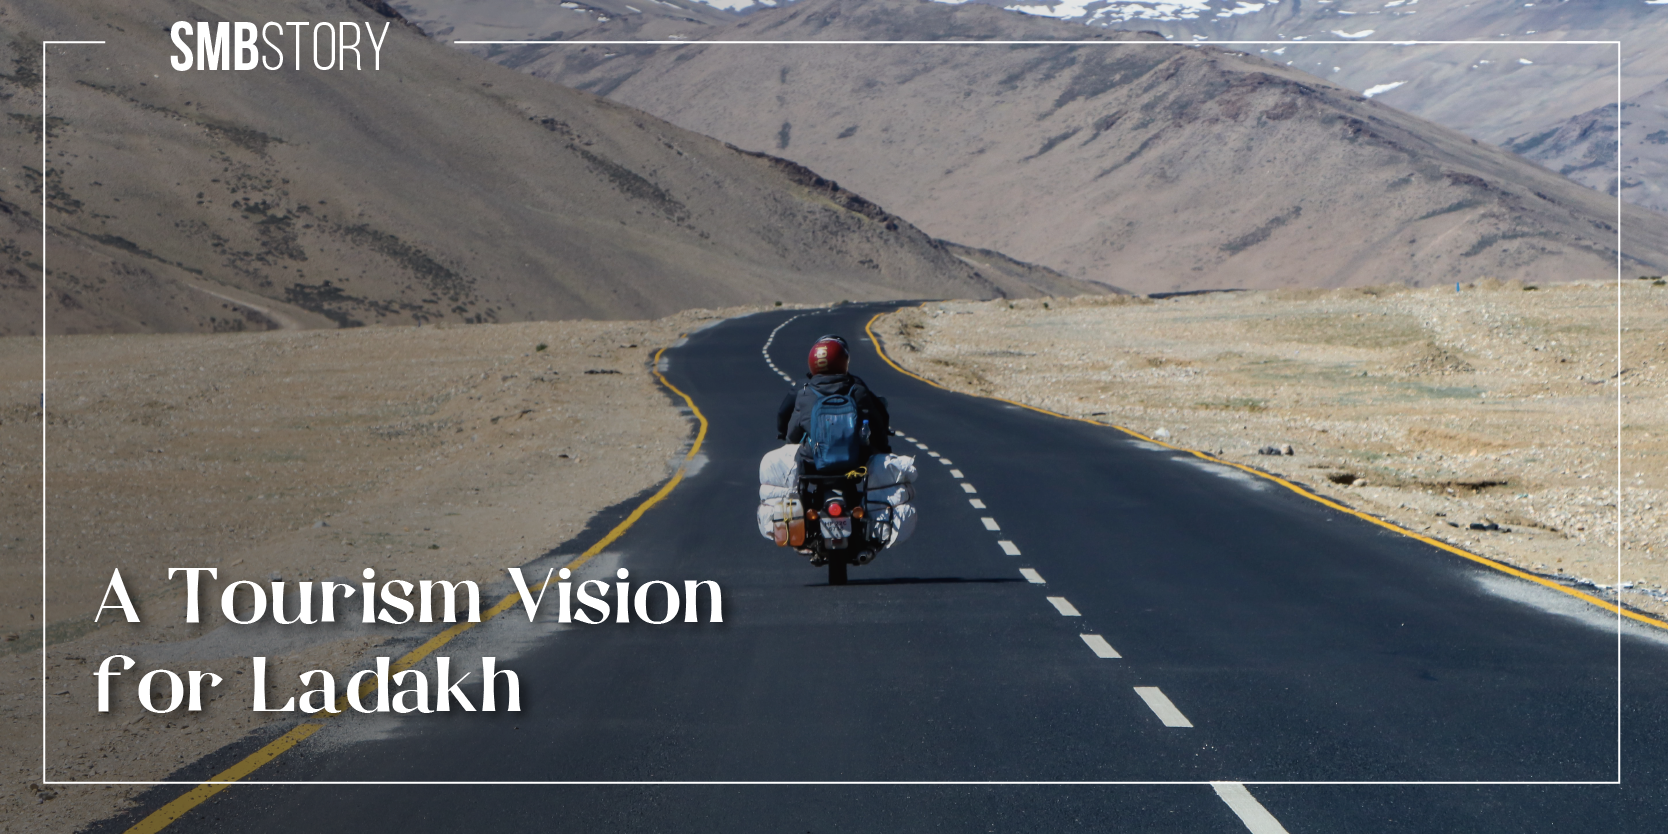 Ladakh to focus on new goals for tourism; unveils vision to promote local businesses 